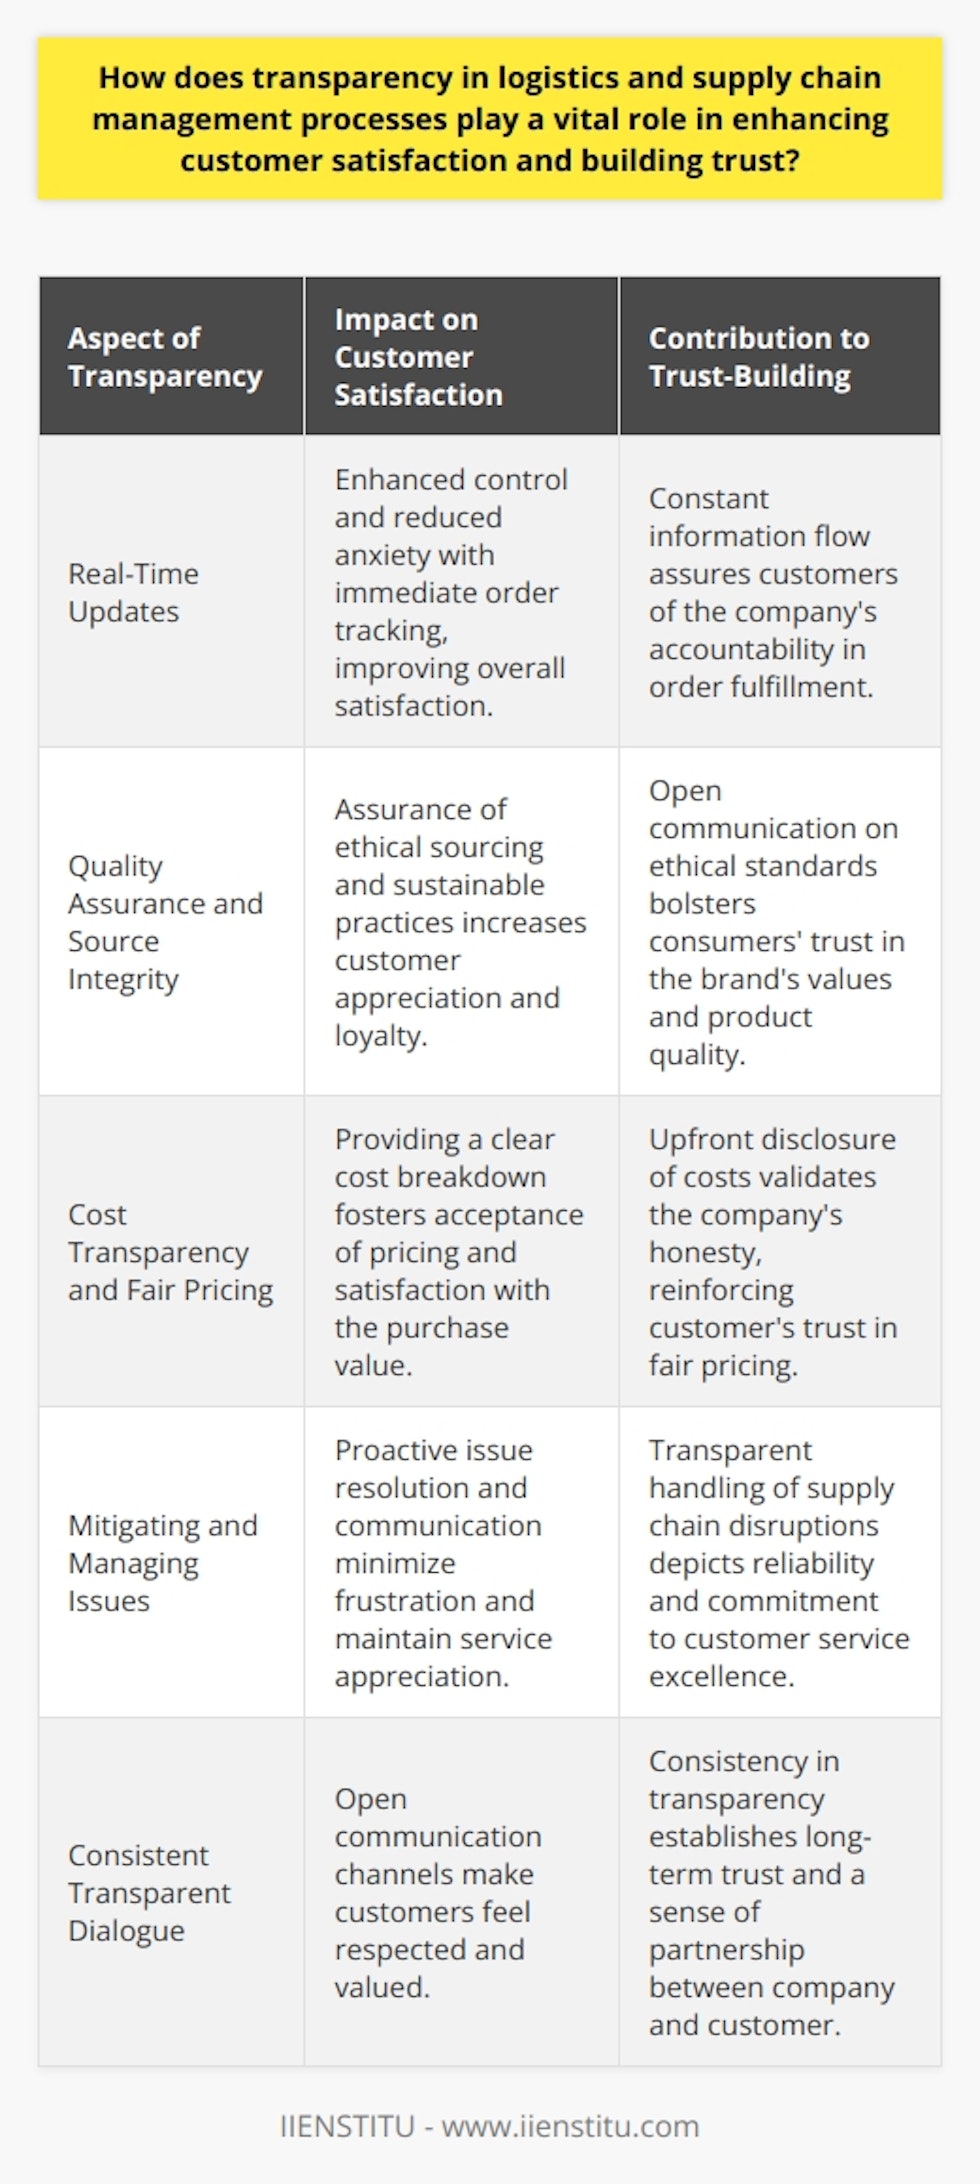 Transparency in logistics and supply chain management has evolved from a laudable goal to a critical competitive advantage. In the contemporary marketplace, where customers are more informed and demanding than ever, the ability to offer clear visibility into the processes of sourcing, shipping, and handling of products can set companies apart and foster unshakeable loyalty. Here’s how transparency affects two major areas: customer satisfaction and trust-building.Customer Satisfaction through Real-Time UpdatesProgressive transparency enables a real-time flow of information, allowing customers to receive updates throughout the journey of their orders. This immediate access to tracking information helps in managing expectations and reduces the anxiety associated with waiting for packages without any knowledge of their whereabouts. When customers are well-informed, they feel more in control, which correlates directly to higher satisfaction levels. The integration of sophisticated tracking systems and providing customers with dashboards to view the status of their orders exemplify how digital tools can bolster transparency in logistics.Quality Assurance and Source IntegritySupply chain transparency isn't just about tracking; it's also fundamentally about integrity and ethical practices. Enlightened customers focus not only on what they're buying but also on where and how their products are made. They care about ethical sourcing and sustainable practices. Companies that openly communicate their efforts in maintaining high standards for sourcing and production processes tend to build stronger relationships with their customers. This form of transparency ensures the customer that quality control checks are in place, thereby reinforcing the assurance that they receive value for their money.Cost Transparency and Fair PricingCustomers are growing wary of hidden fees and unexplained surcharges. A breakdown of costs, including manufacturing, shipping, and handling fees, delineates how the final price was reached. When companies are upfront about these costs, customers can appreciate the inherent value and feel more content with their purchase, knowing there are no hidden expenses.Mitigating and Managing IssuesTransparency is not only about sharing the good but also about promptly communicating when things go awry. Supply chains are vulnerable to a variety of risks, including delays, damage to goods, and logistical errors. When companies have transparent systems, they can quickly identify and address these issues, and inform customers about them proactively. Transparent communication during such incidents helps to maintain trust and can even turn negative experiences into opportunities for demonstrating excellent customer service.Trust through TransparencyEstablishing a consistent, transparent dialogue with customers, in good times and bad, goes a long way in building trust. Trust stems from the knowledge that a company is not just a faceless entity but a responsible partner in the customer's purchase experience. When customers trust a company, they are more likely to become repeat buyers and even brand advocates.Looking ForwardThe future of logistics and supply chain management is inextricably linked to the advancement of transparency. Customers expect and demand it, and technology is enabling it in unprecedented ways. The onus is on businesses to continue evolving their transparency practices. Only then can they truly meet the demands of the modern consumer and maintain an edge in the competitive market.In summary, transparency in the logistics and supply chain process is no longer an option, but a fundamental operation that drives customer satisfaction and trust. By committing to openness in real-time tracking, quality assurance, cost breakdown, and active communication of issues, companies can build a loyal customer base and a reputation for integrity, which are indispensable assets in today's business environment.